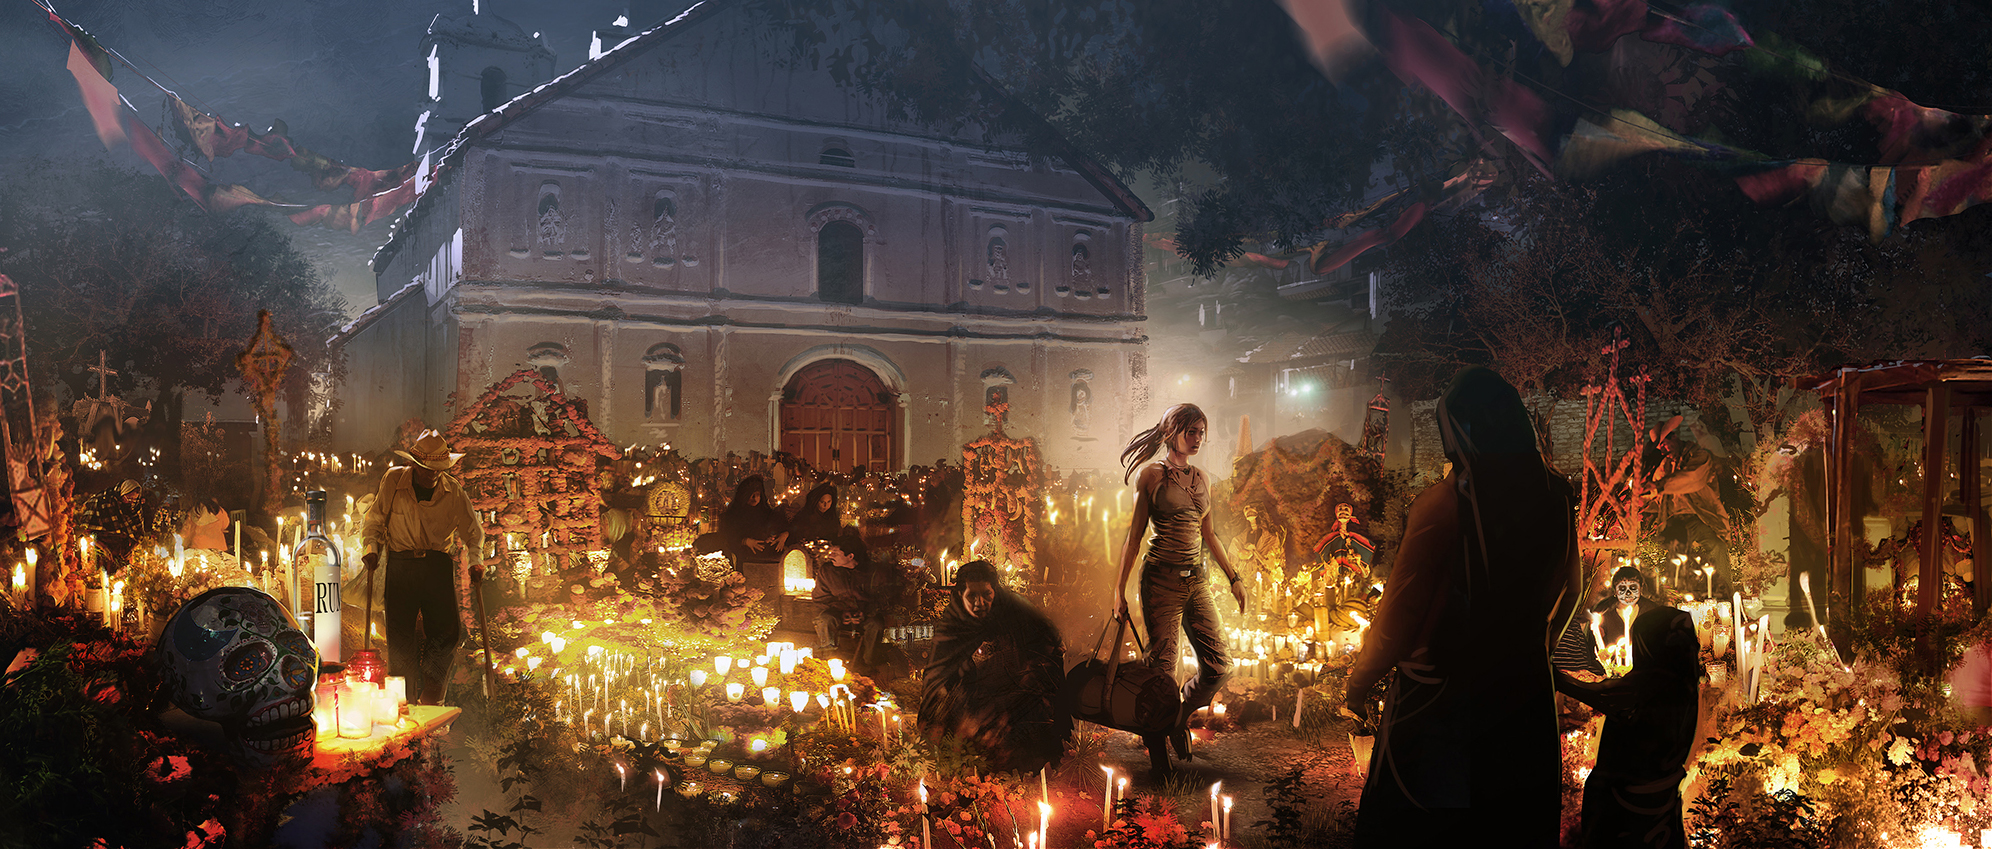 General 1992x849 Shadow of the Tomb Raider video games concept art Tomb Raider PC gaming candles night skull Lara Croft (Tomb Raider) video game art